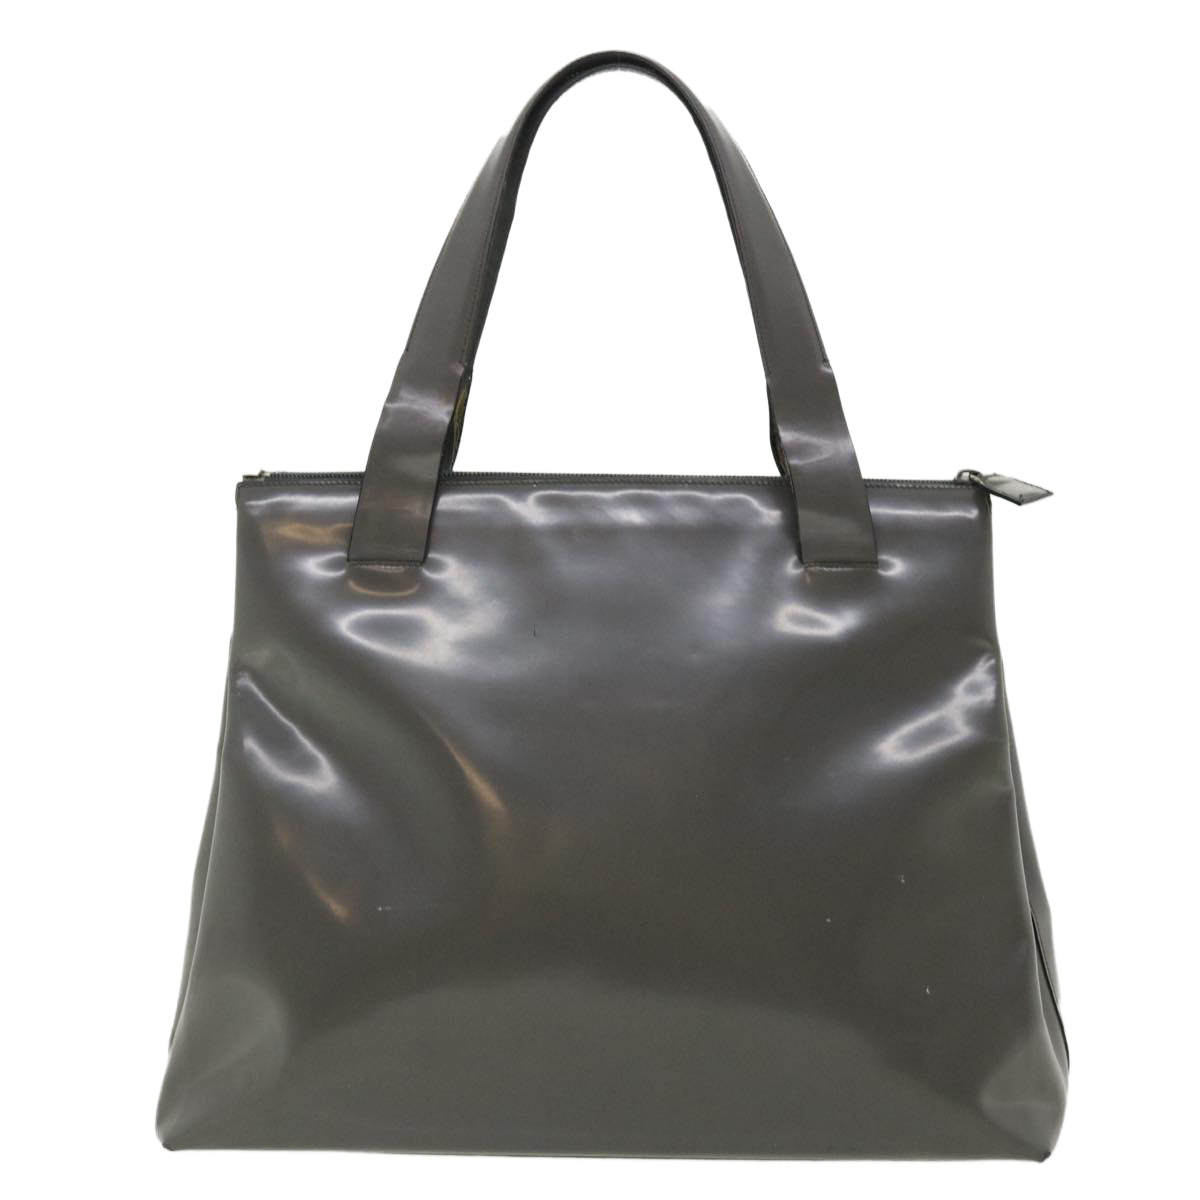 PRADA Tote Bag Patent Leather Gray Auth cl230 - 0